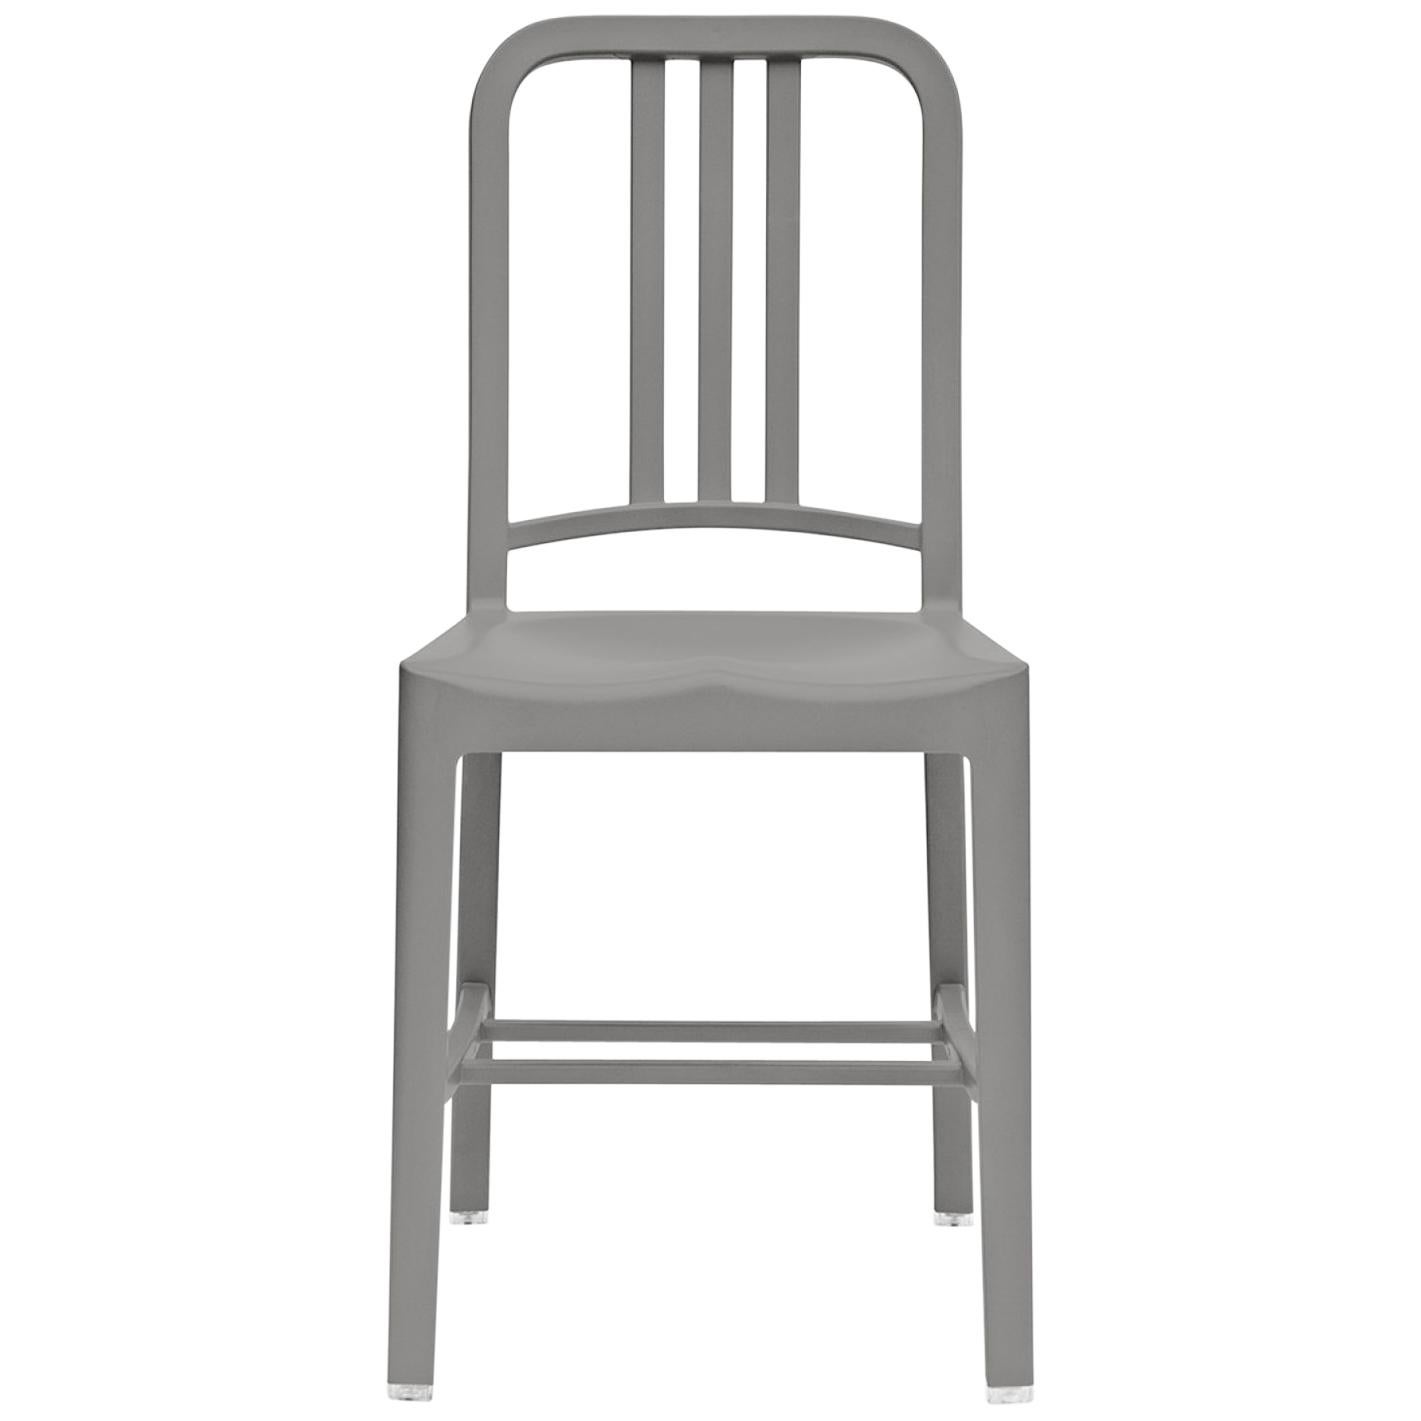 Emeco 111 Navy Chair in Flint by Coca-Cola For Sale